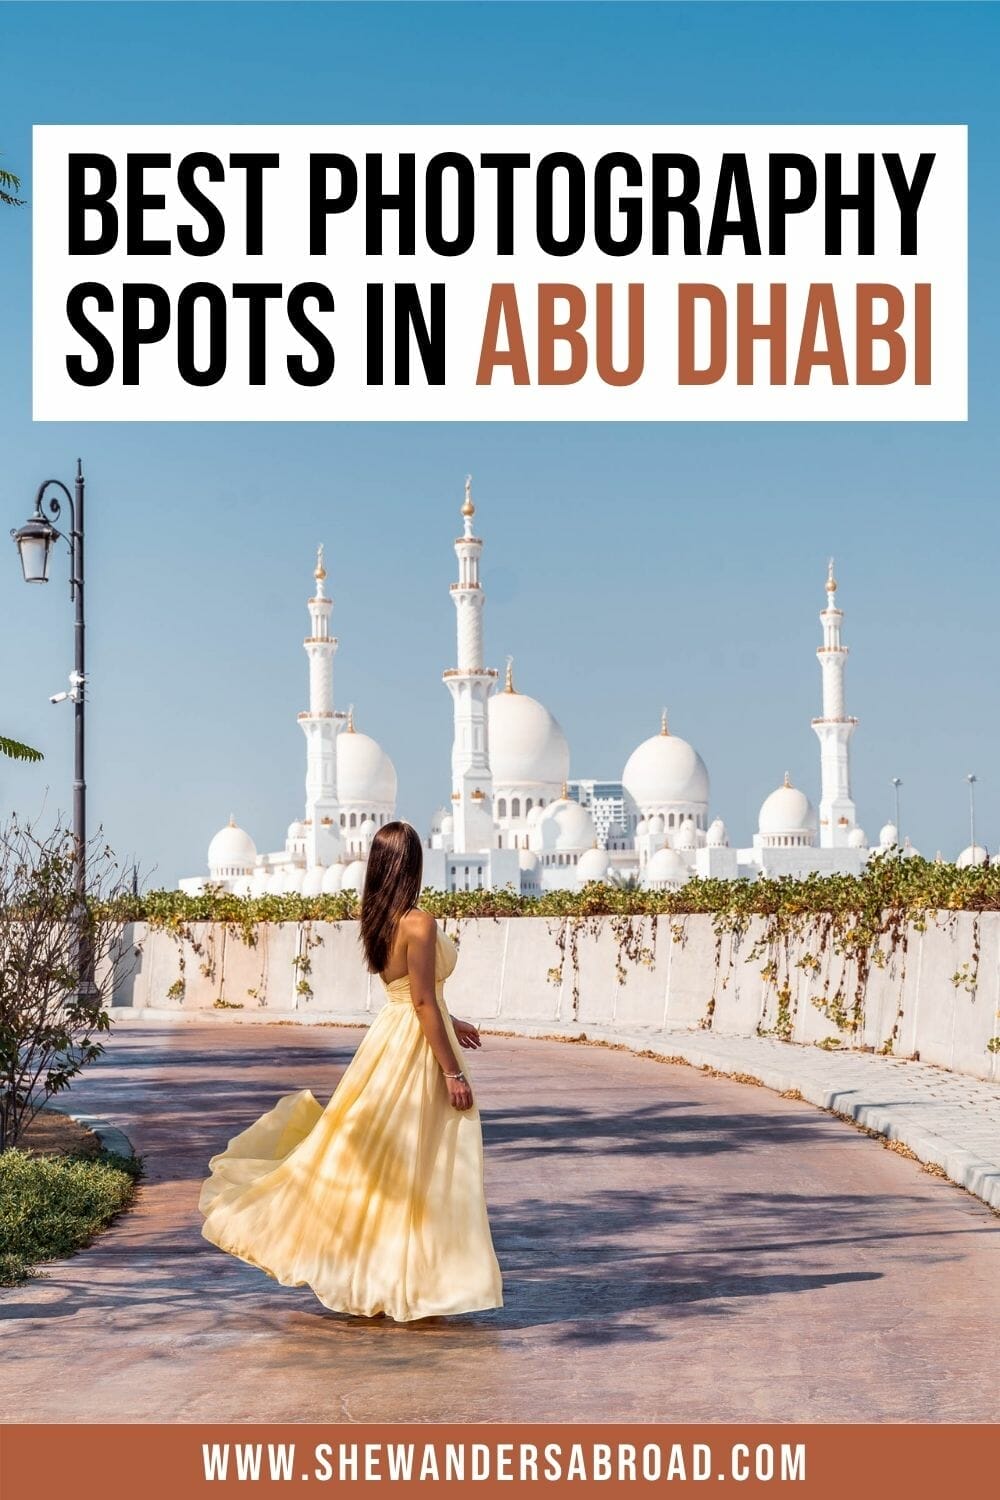 Most Instagrammable Places in Abu Dhabi